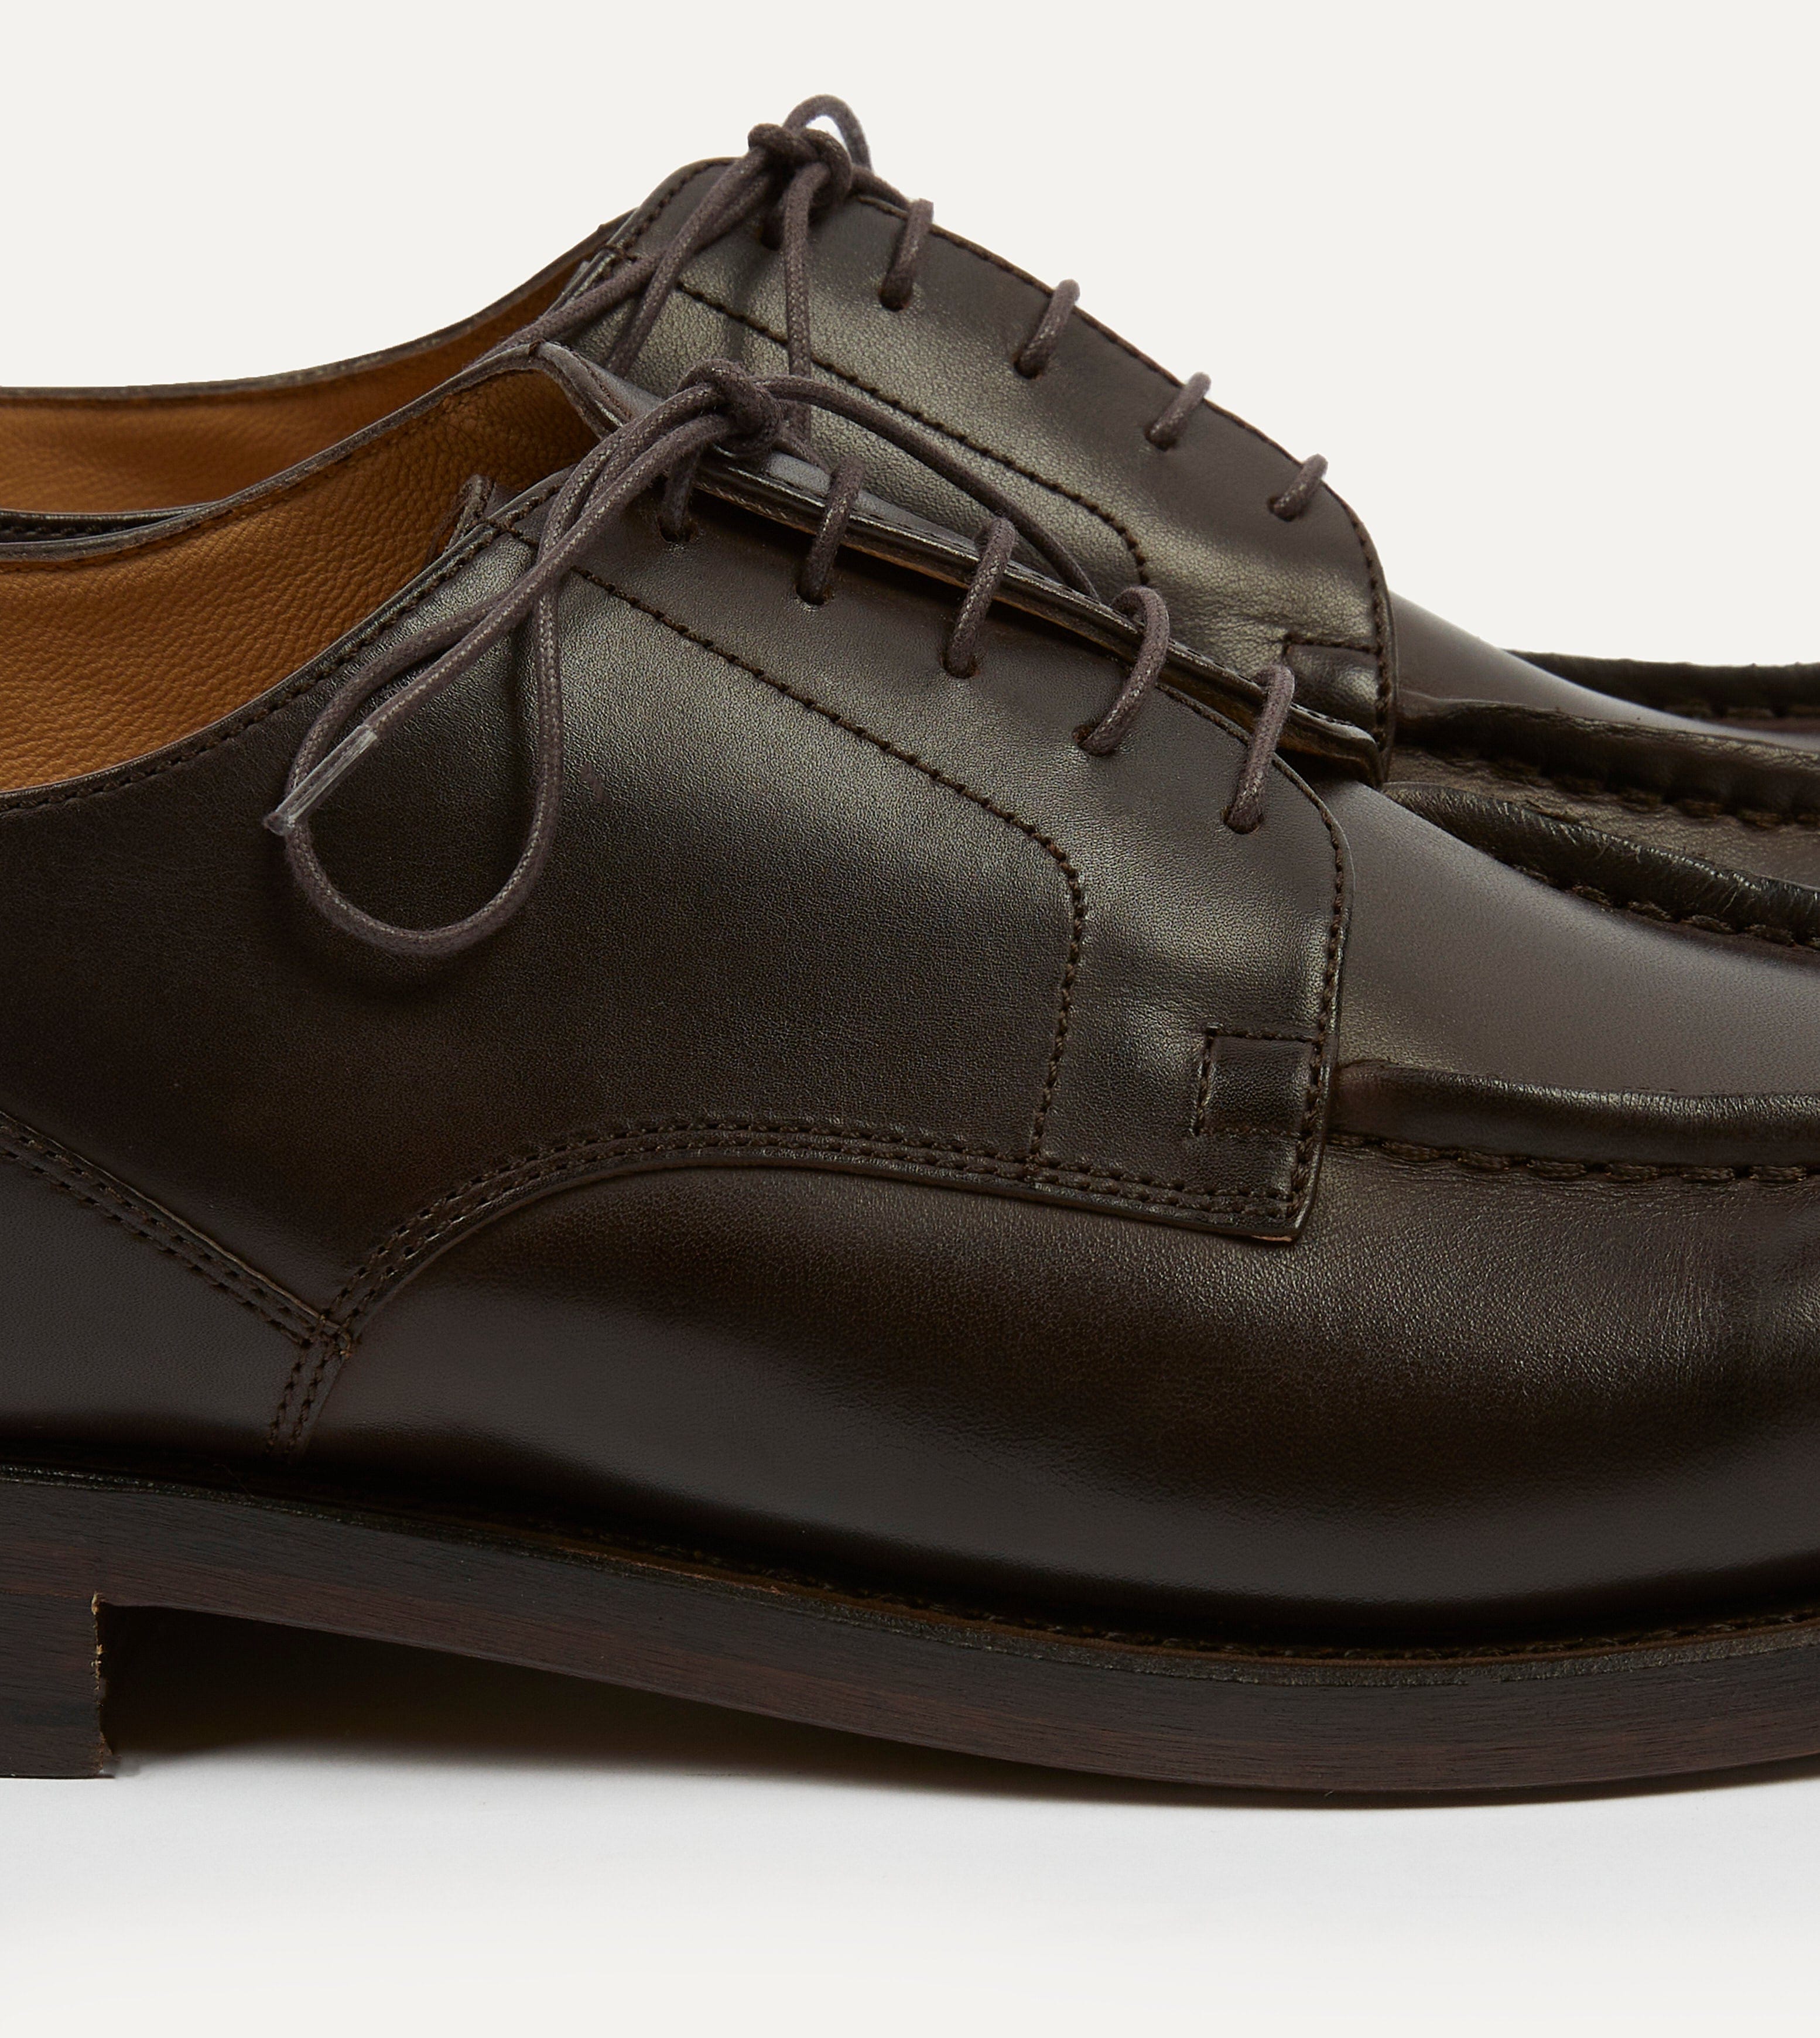 Paraboot Chambord Brown Calf Leather Derby Shoe – Drakes